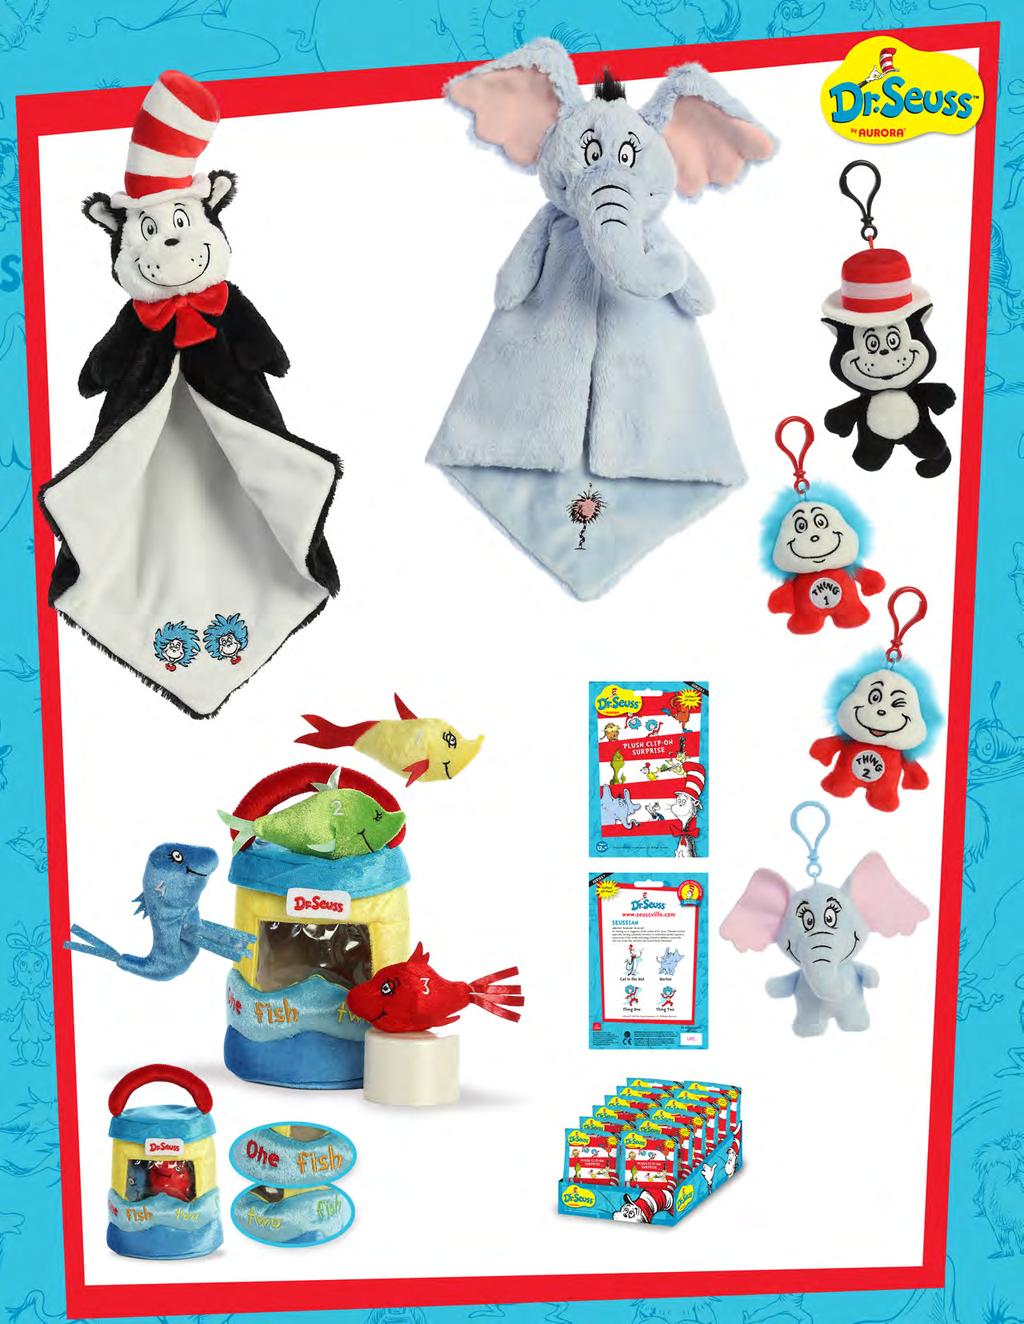 Available July 15, 2018 Cat in the Hat Luvster 20 15917 Horton Luvster 18 15918 Bubble C CRINKLE Crinkle SQUEAKERS Squeaker RATTLE R